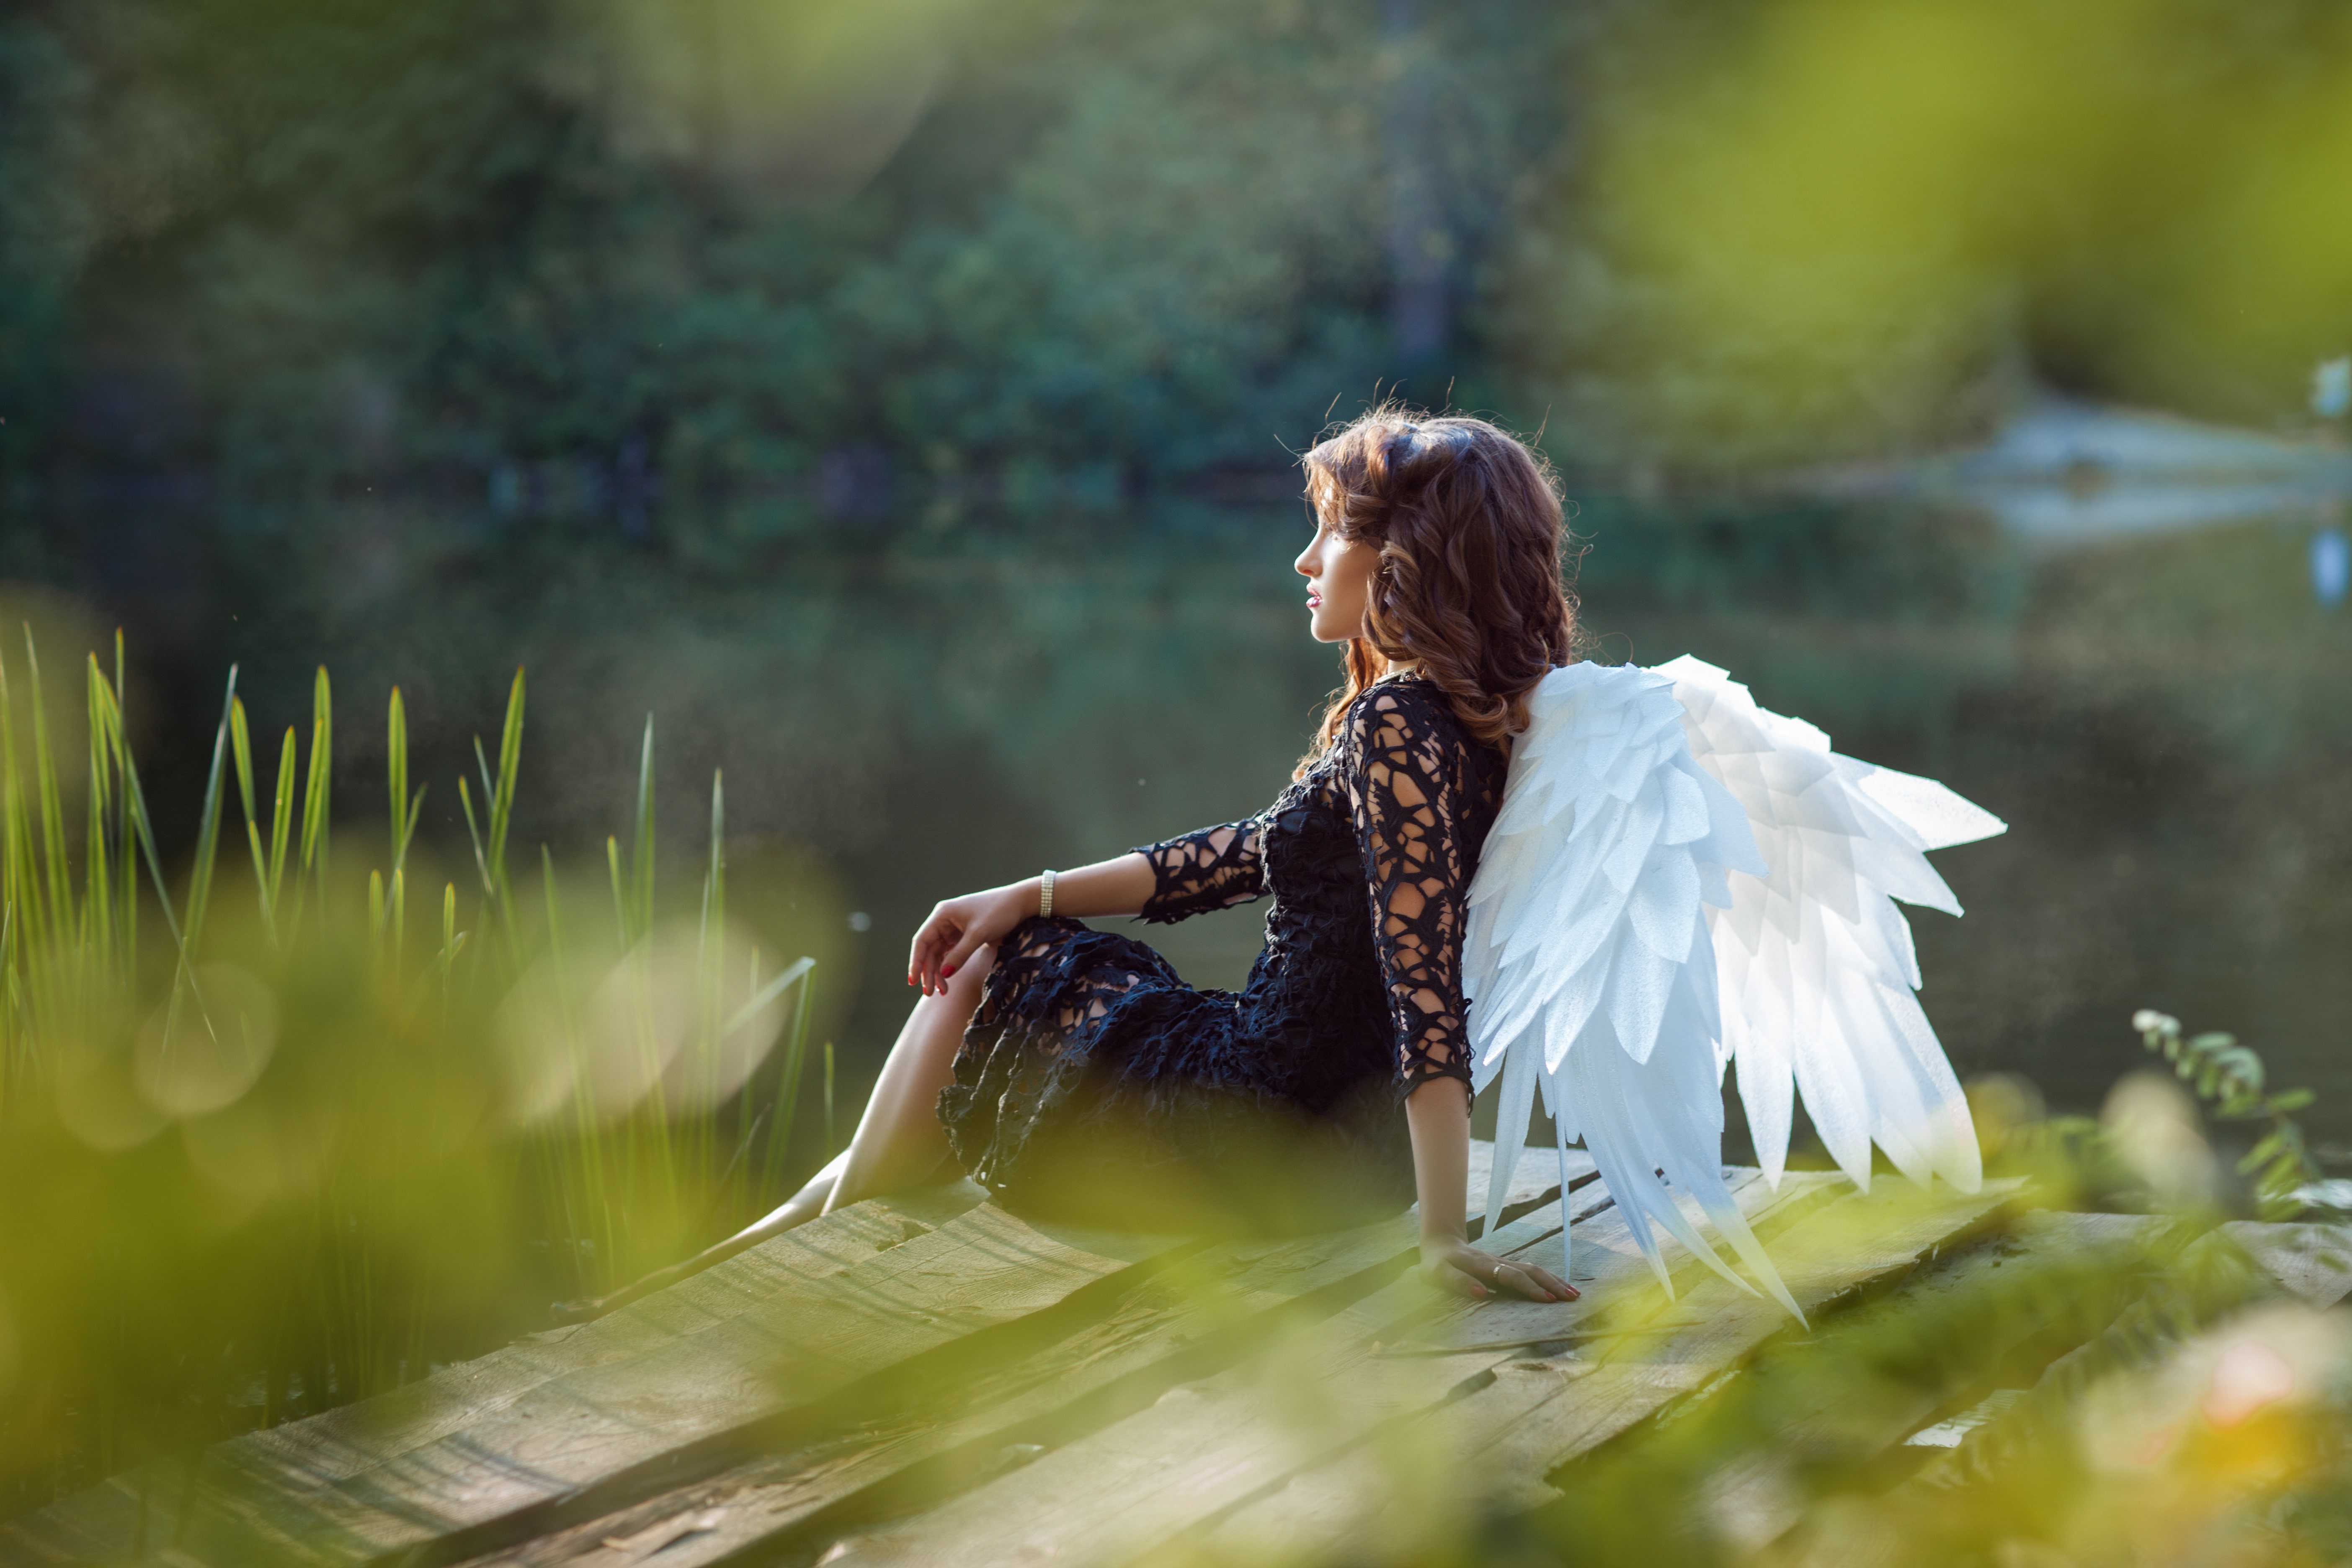 On the pier sits a young woman with angel wings